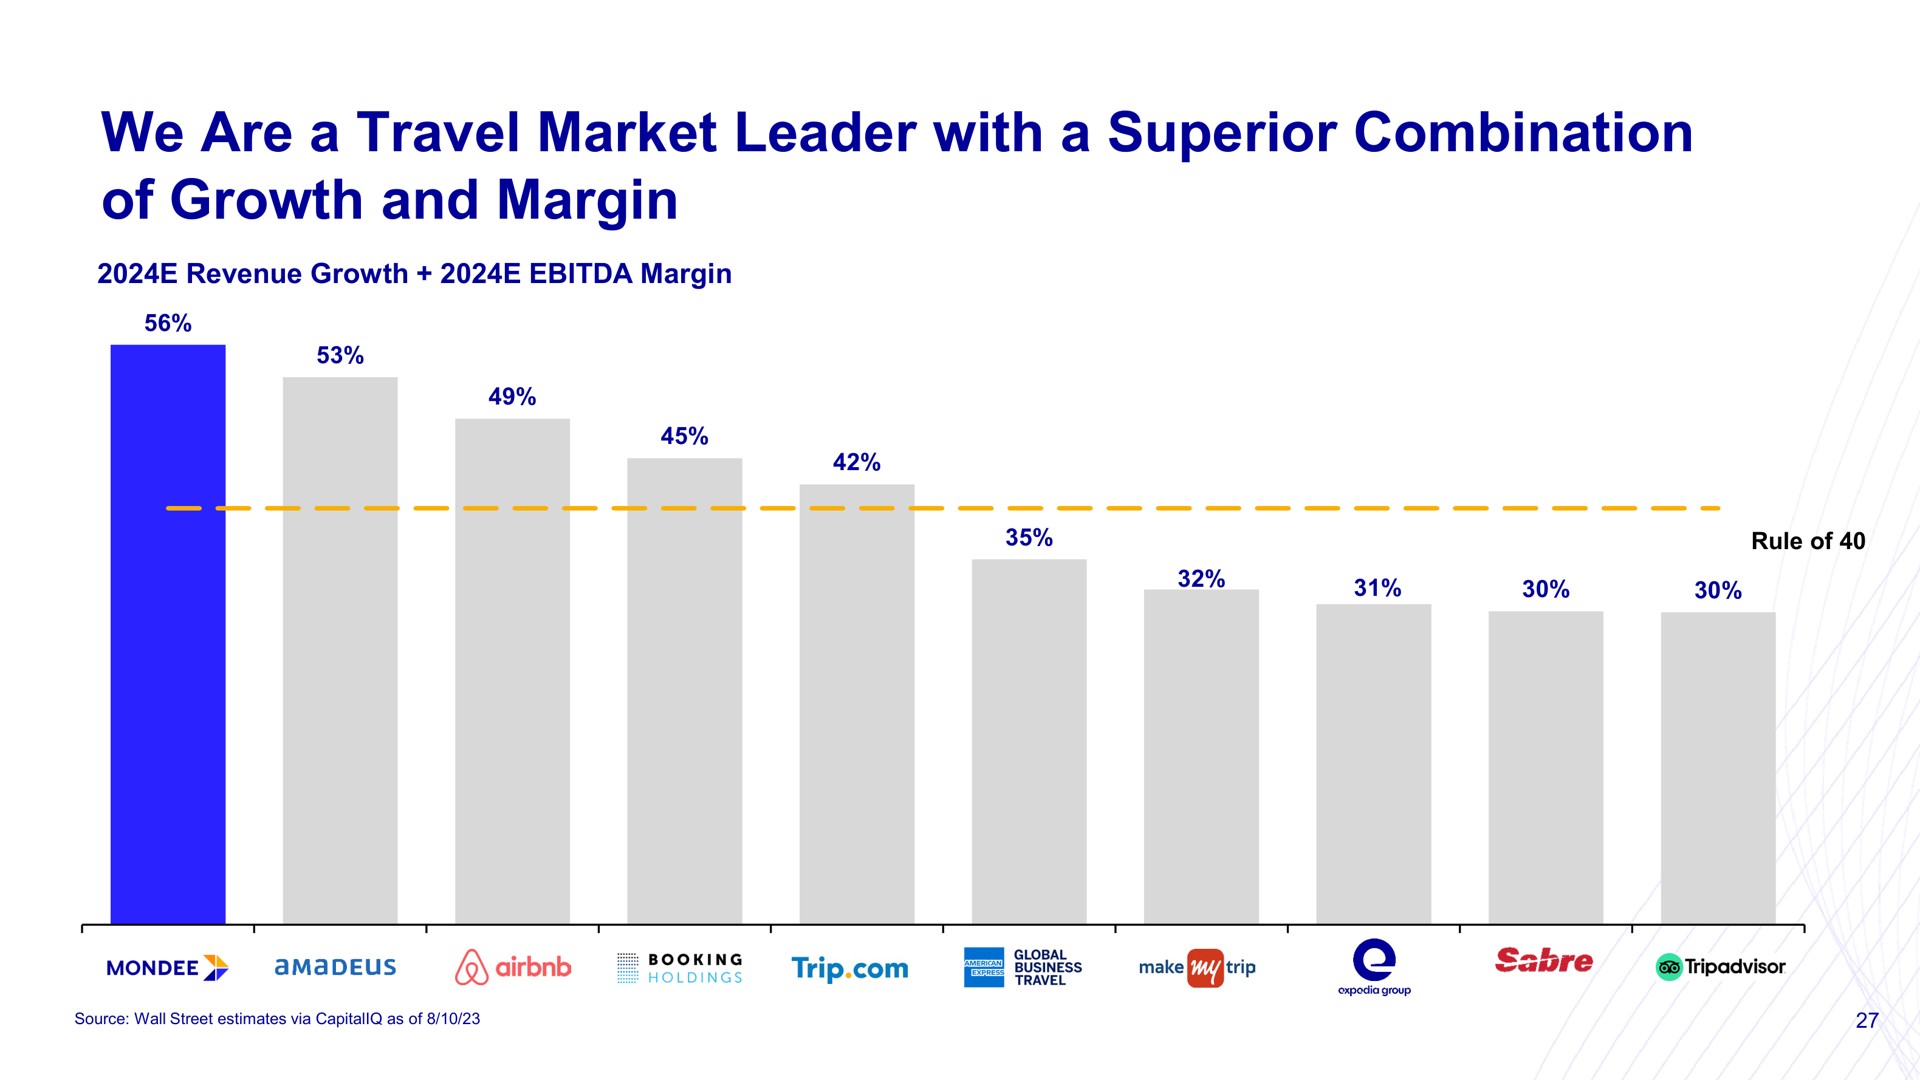 we are a travel market leader with a superior combination of growth and margin | Mondee